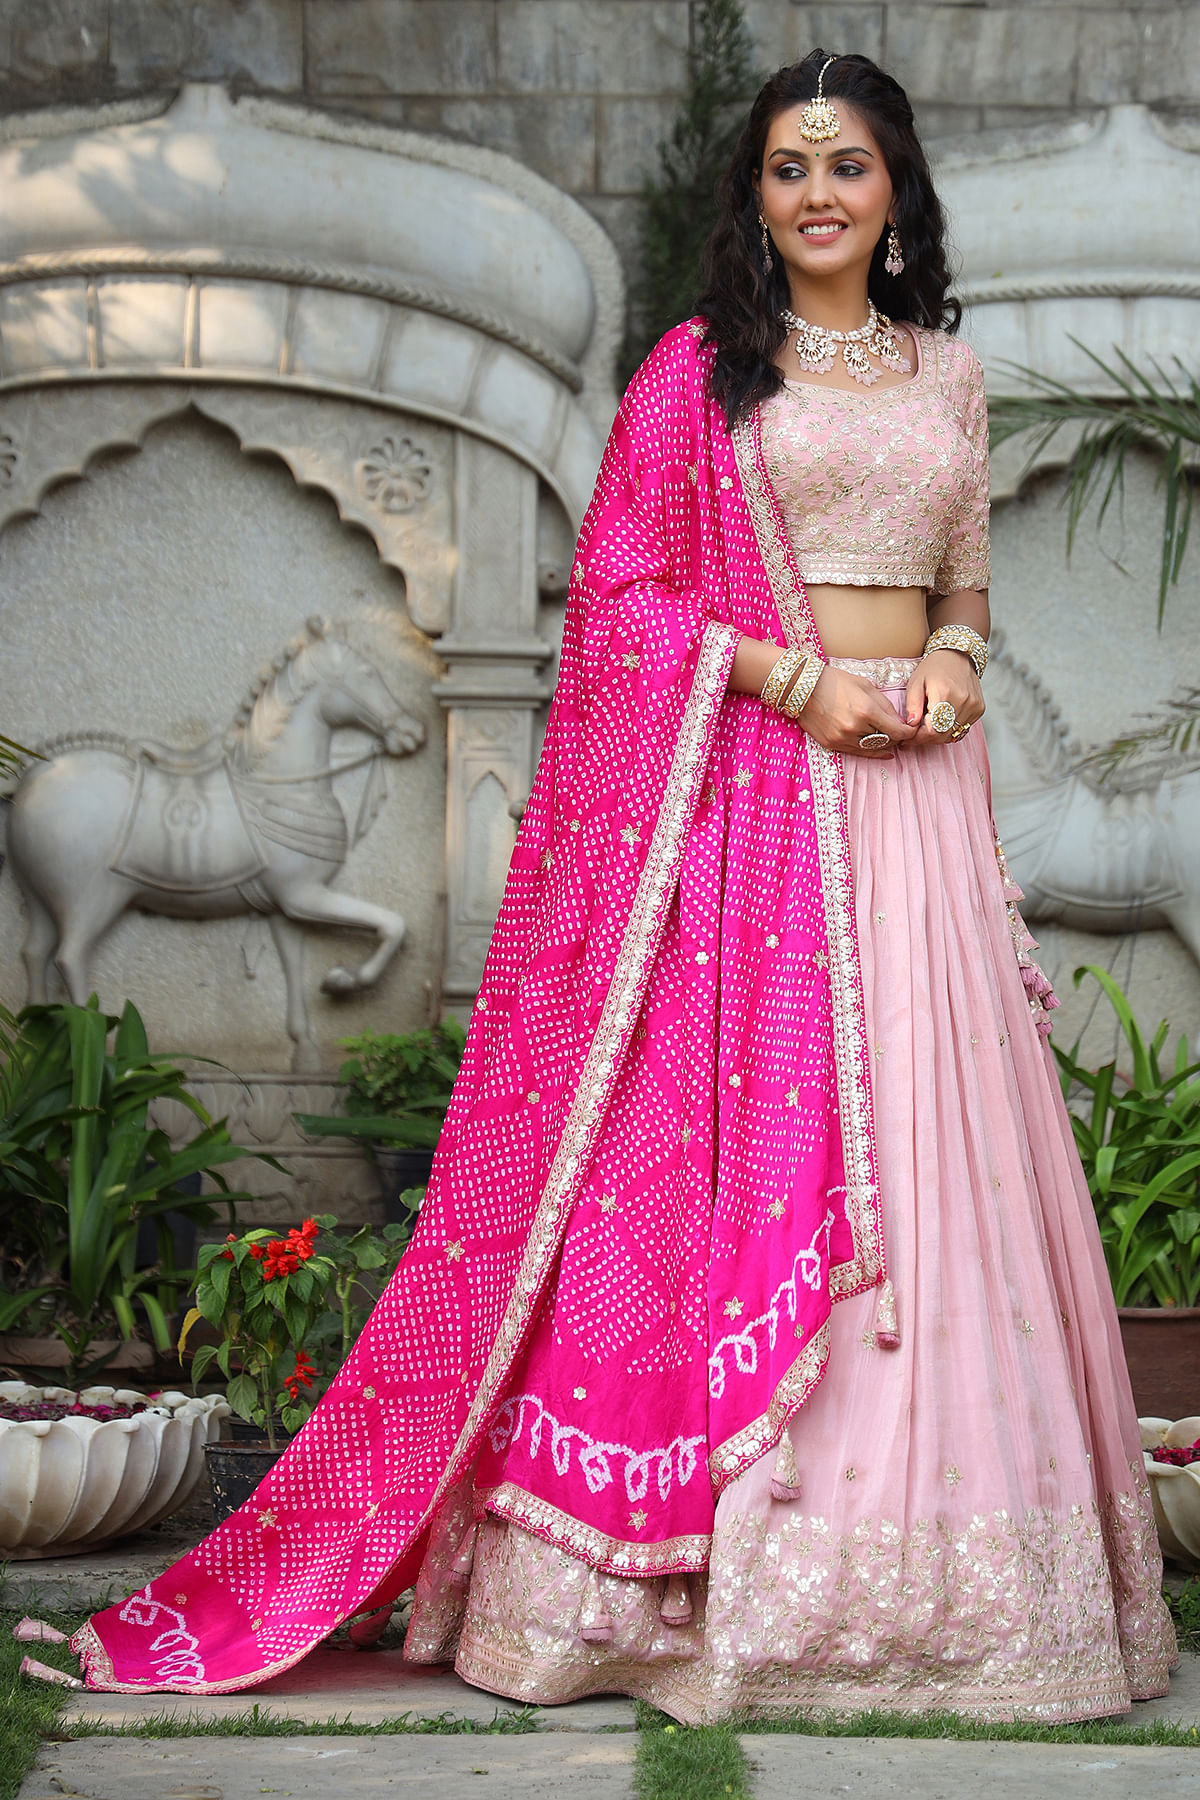 Hot Pink Bridal Lehenga in Raw Silk Intricately Ornated in  Aari-Beads-Sequins- Mirror with Bordered Net Dupatta - Aara Couture